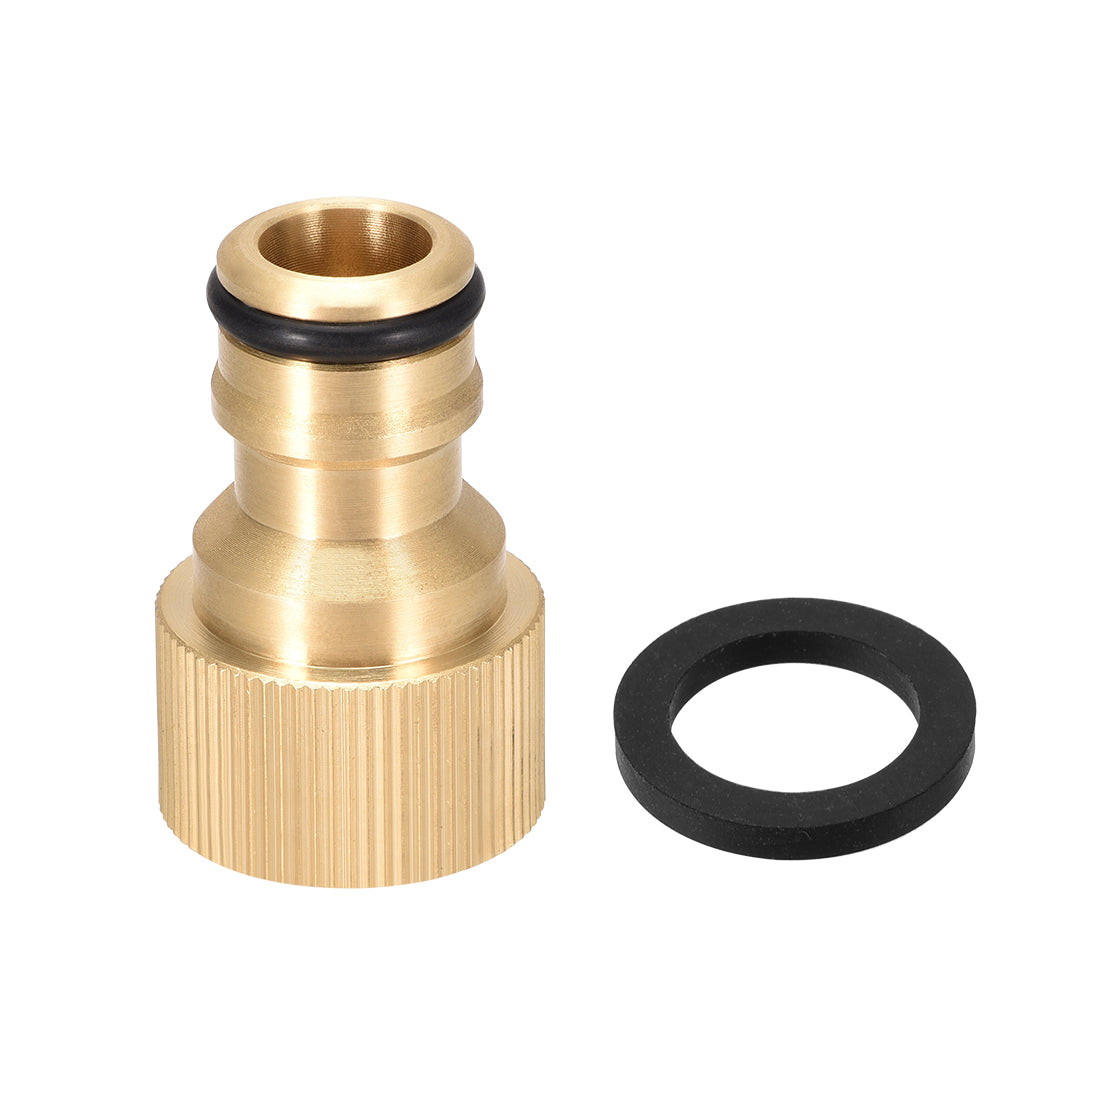 uxcell Uxcell Brass Faucet Tap Quick Connector G1/2 Female Thread Hose Pipe Socket Adapter